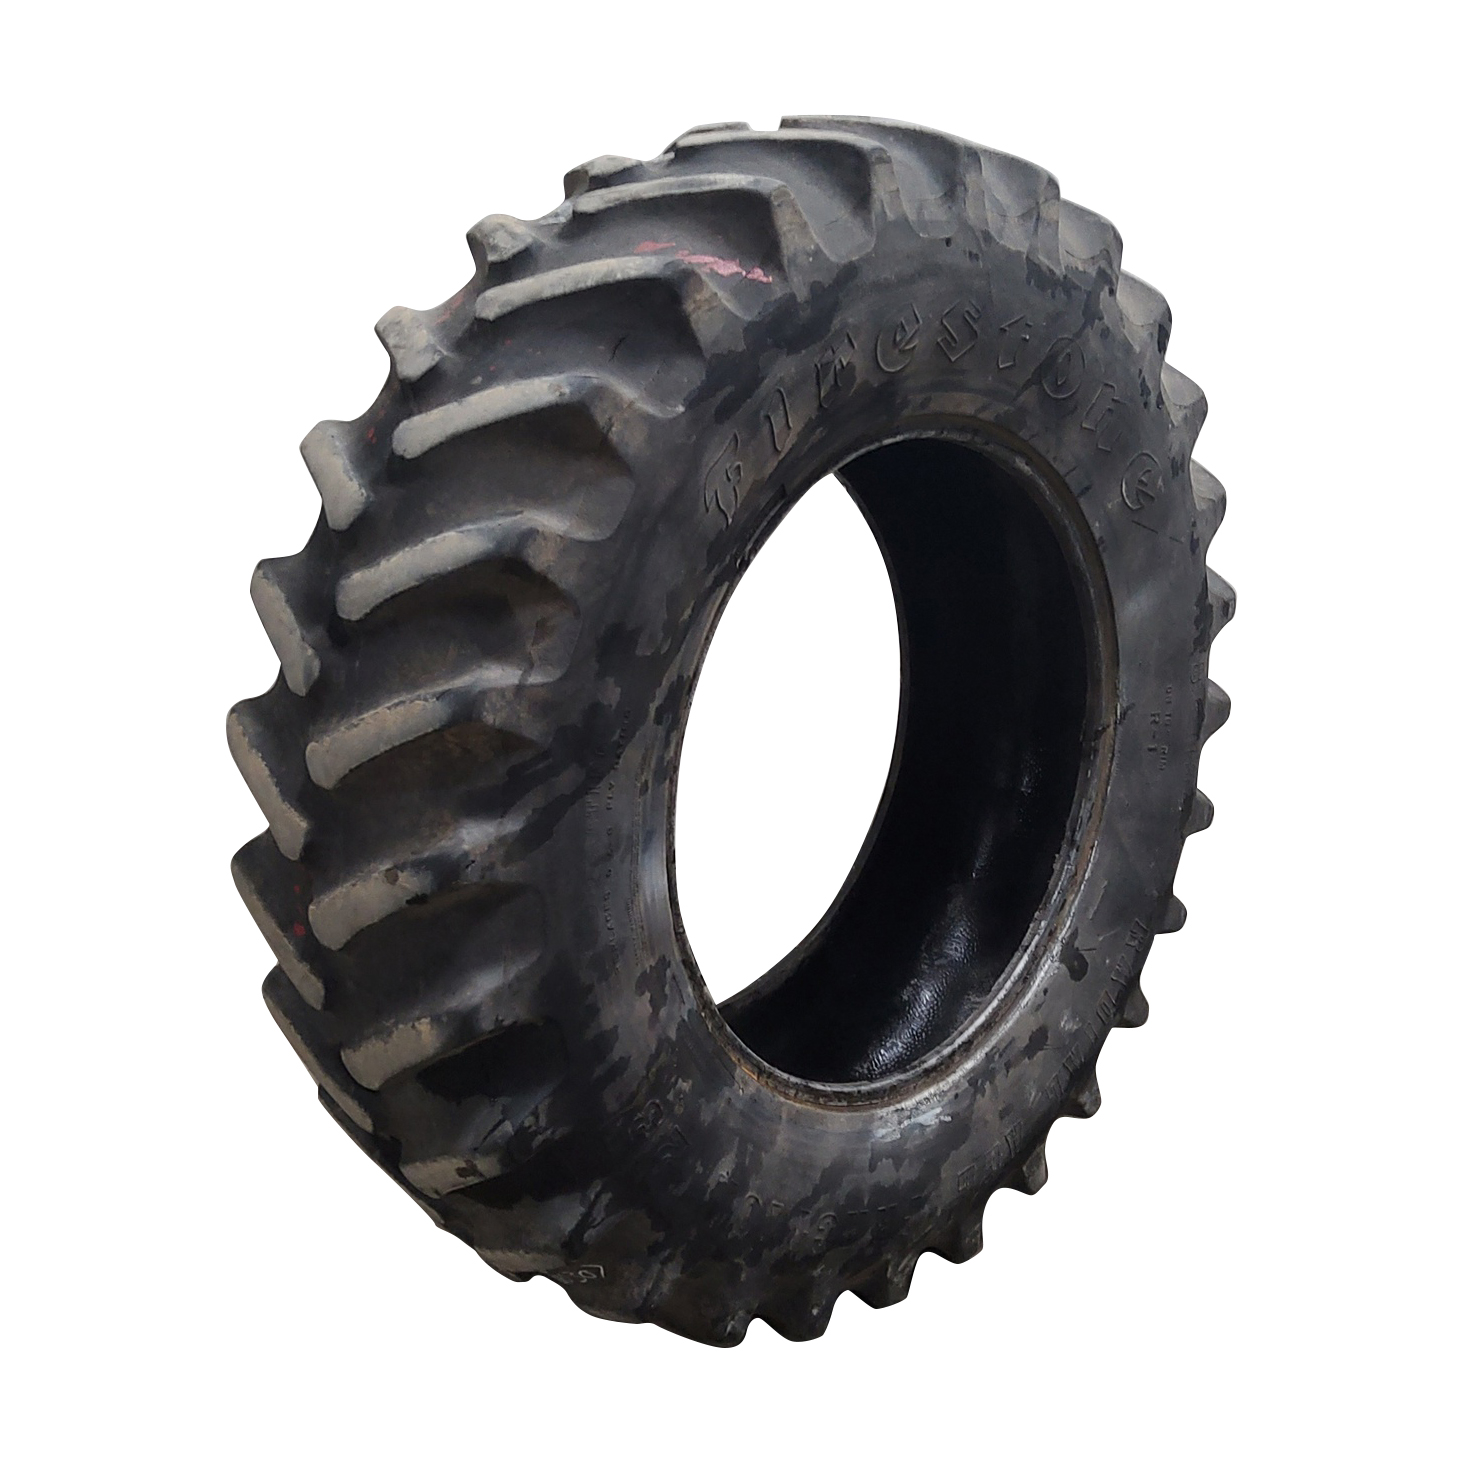 PNEU RADIAL ALL TRACTION™ DT - Firestone Commercial